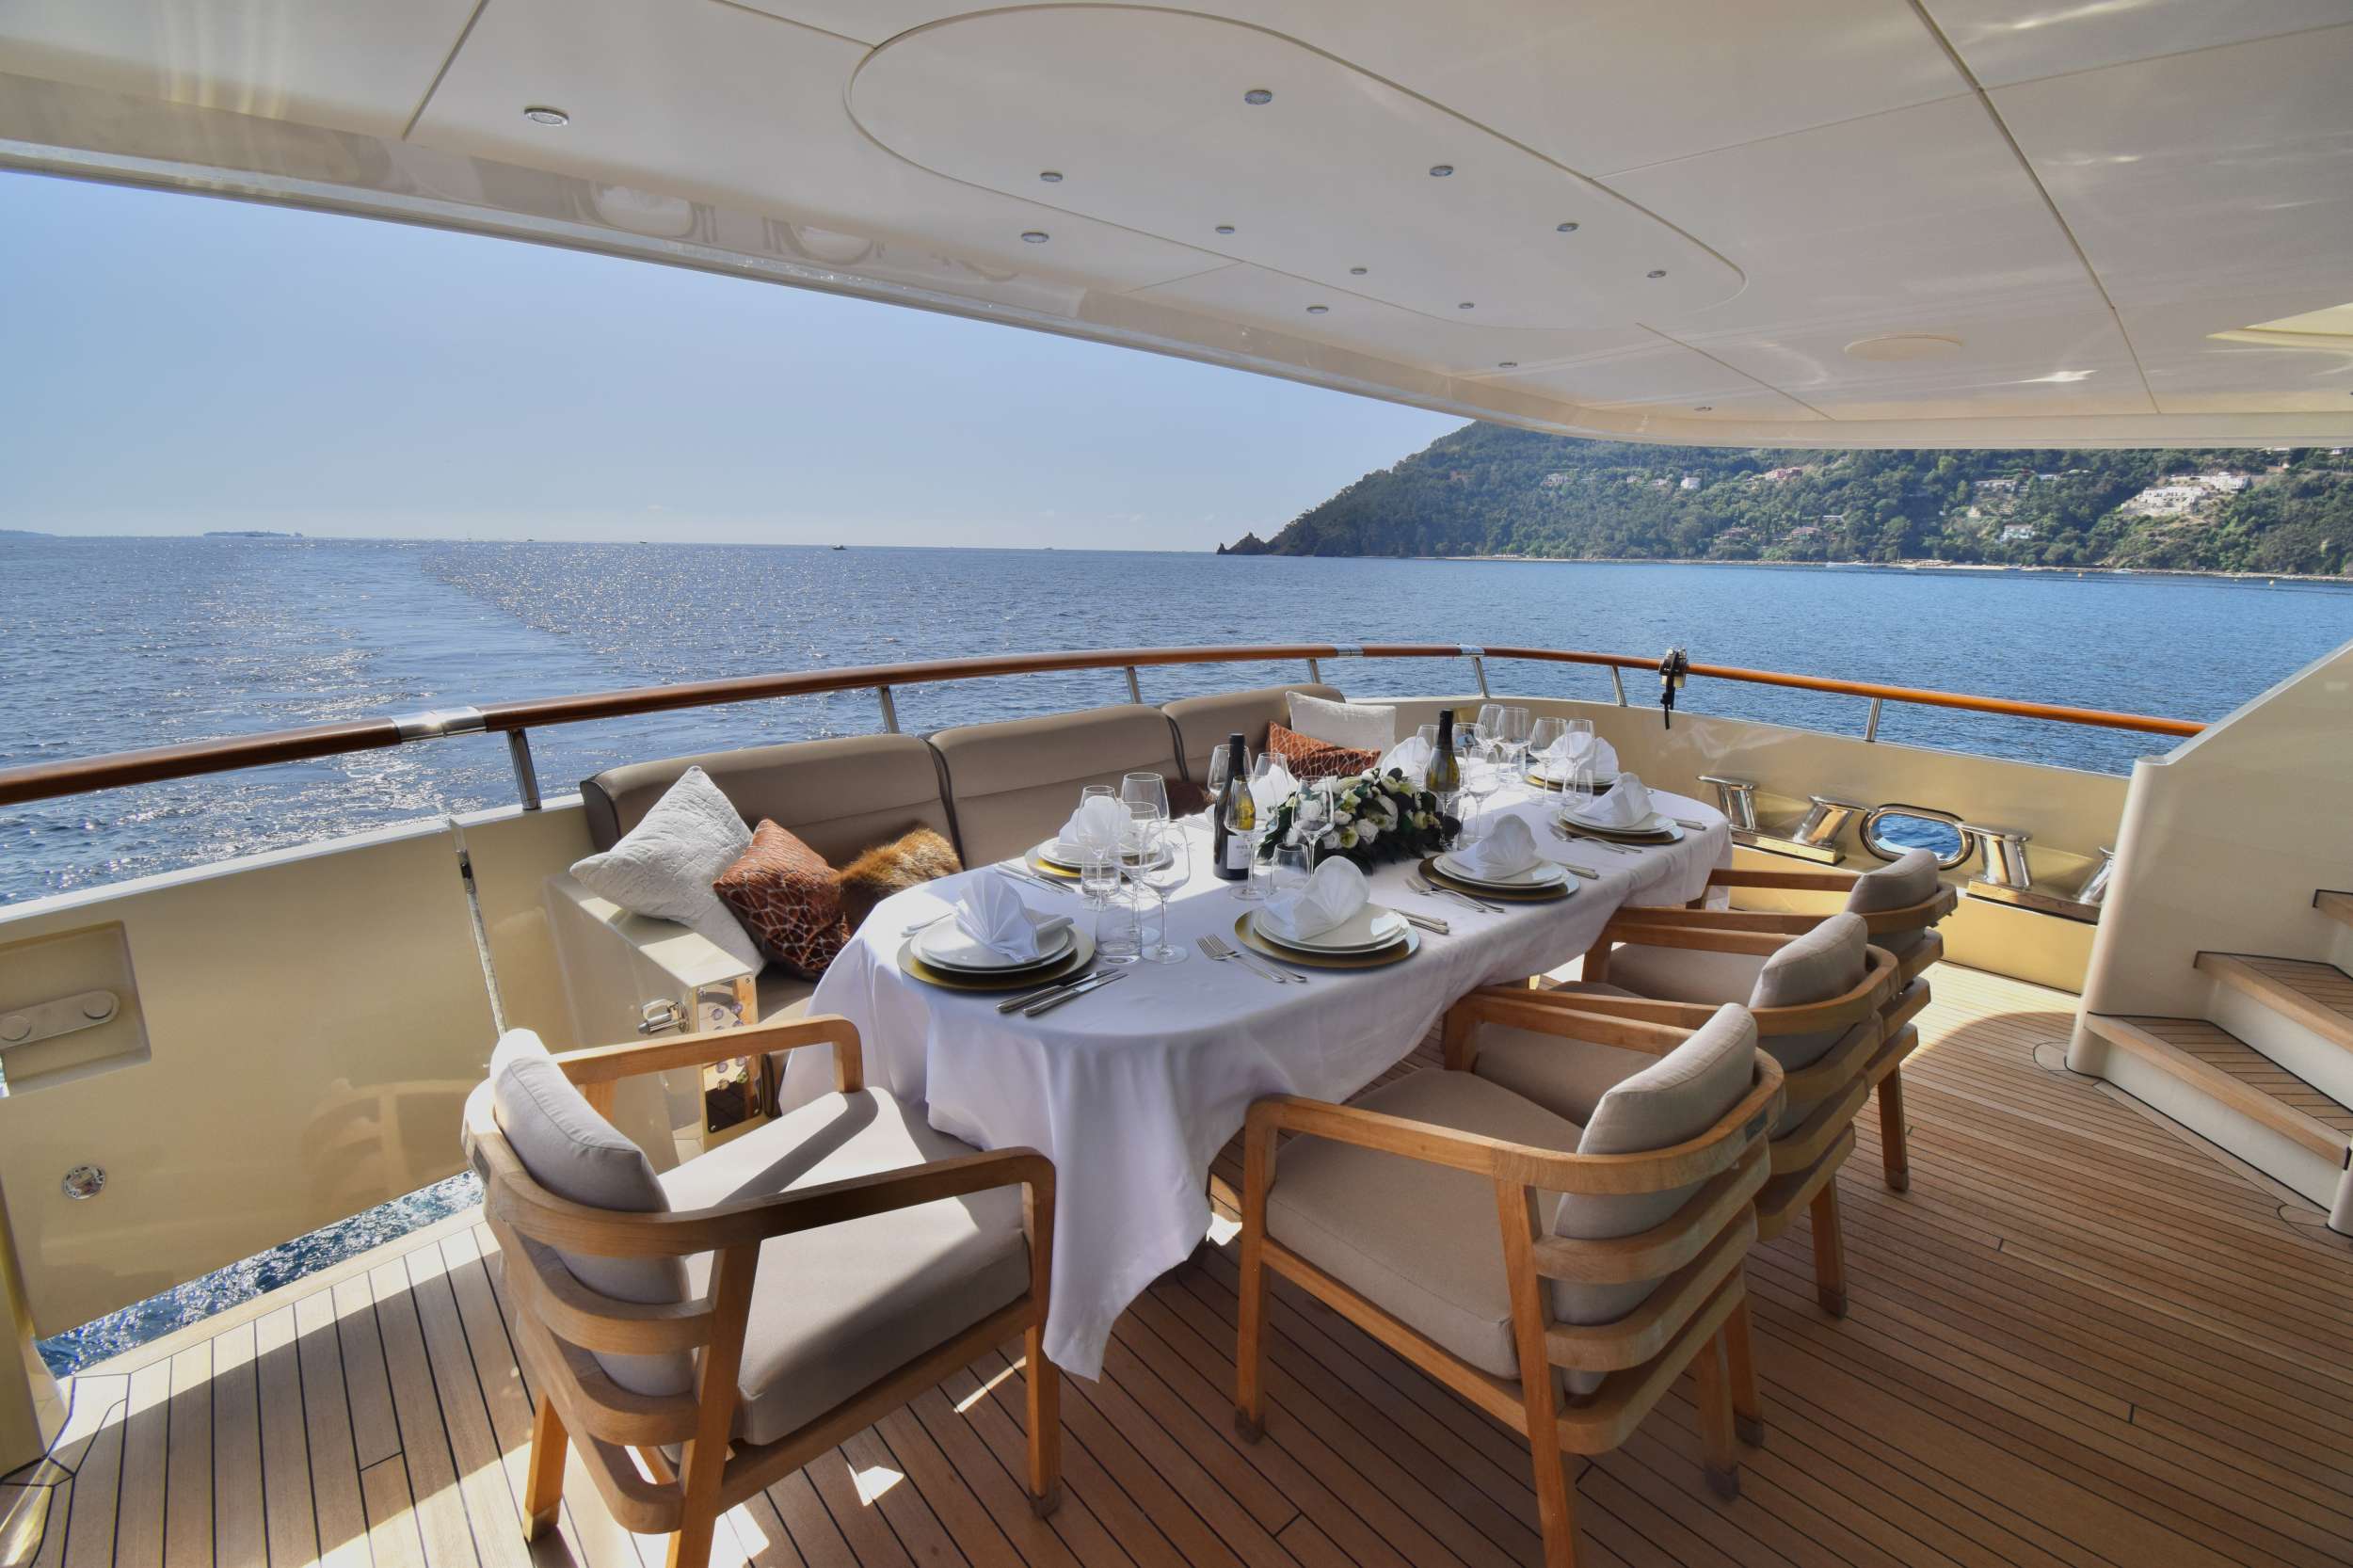 ORIZZONTE - Yacht Charter Radazul & Boat hire in W. Med -Naples/Sicily, W. Med -Riviera/Cors/Sard., W. Med - Spain/Balearics 3